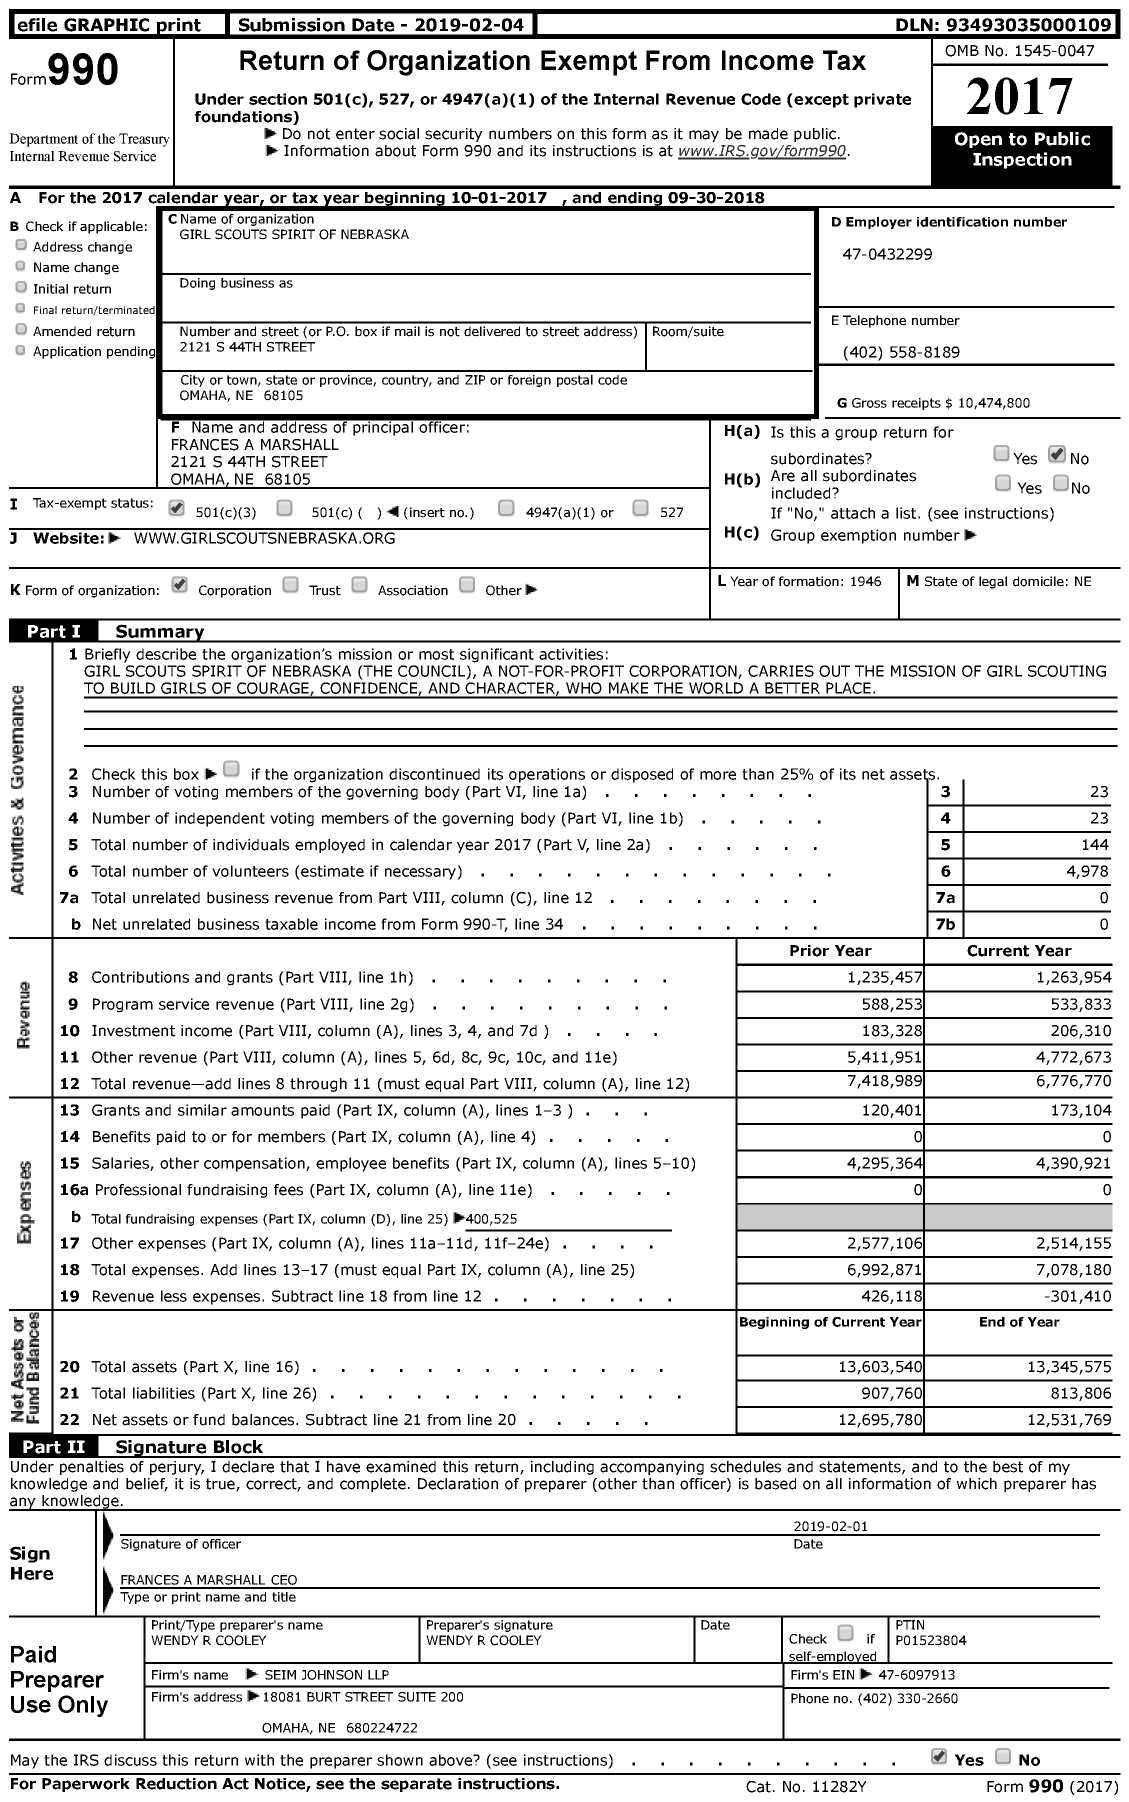 Image of first page of 2017 Form 990 for Girl Scouts-Spirit of Nebraska